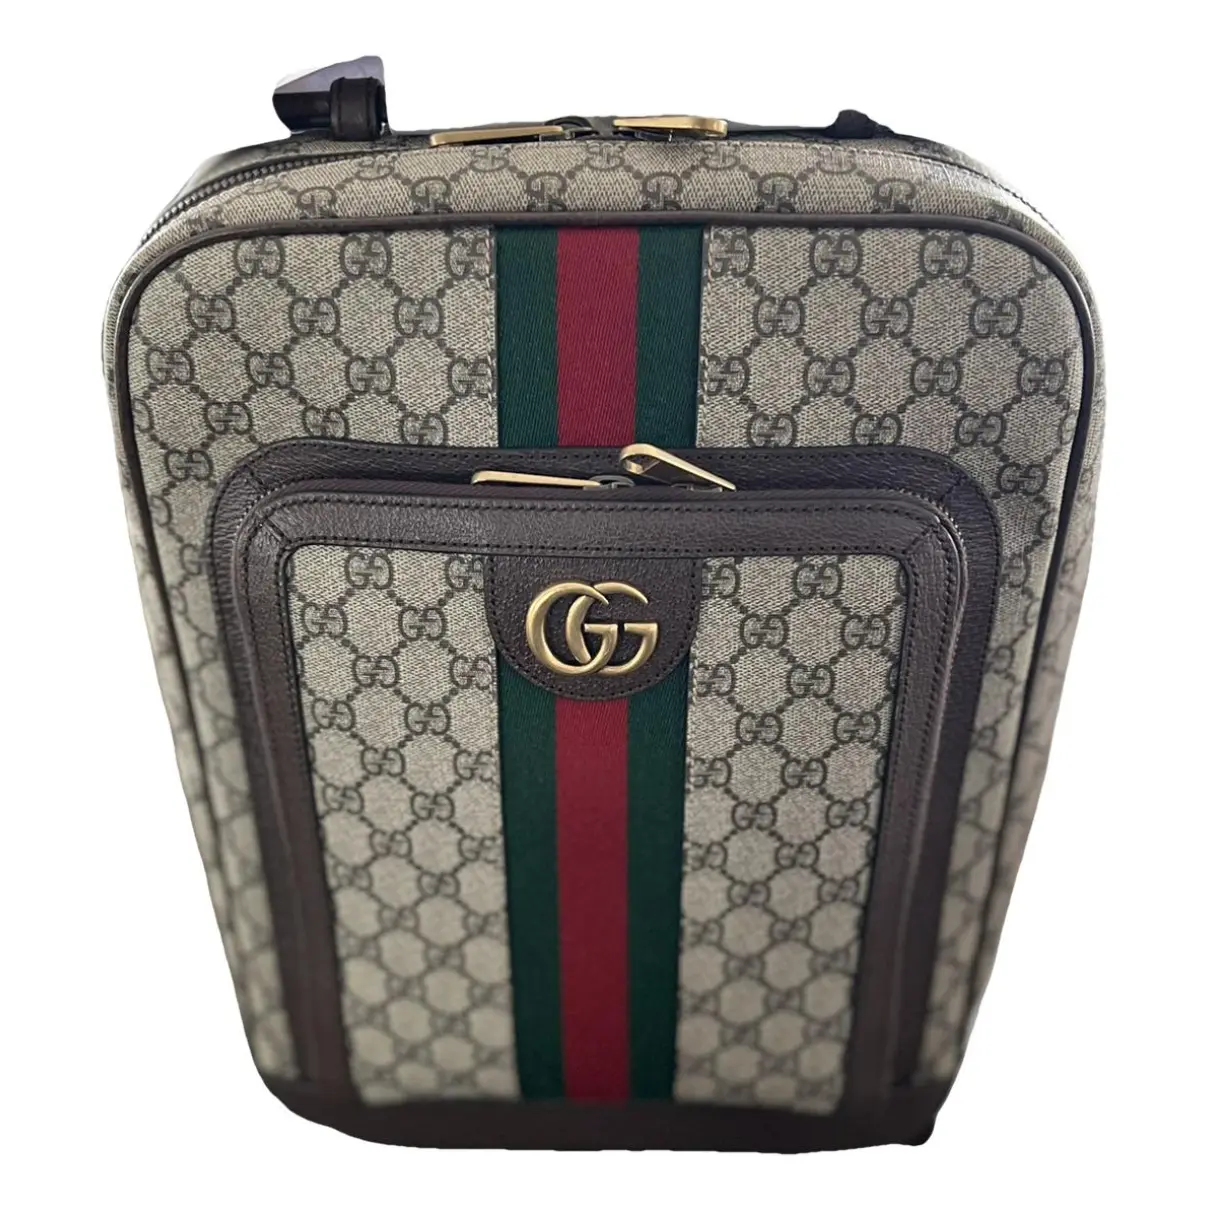 Ophidia bag Gucci